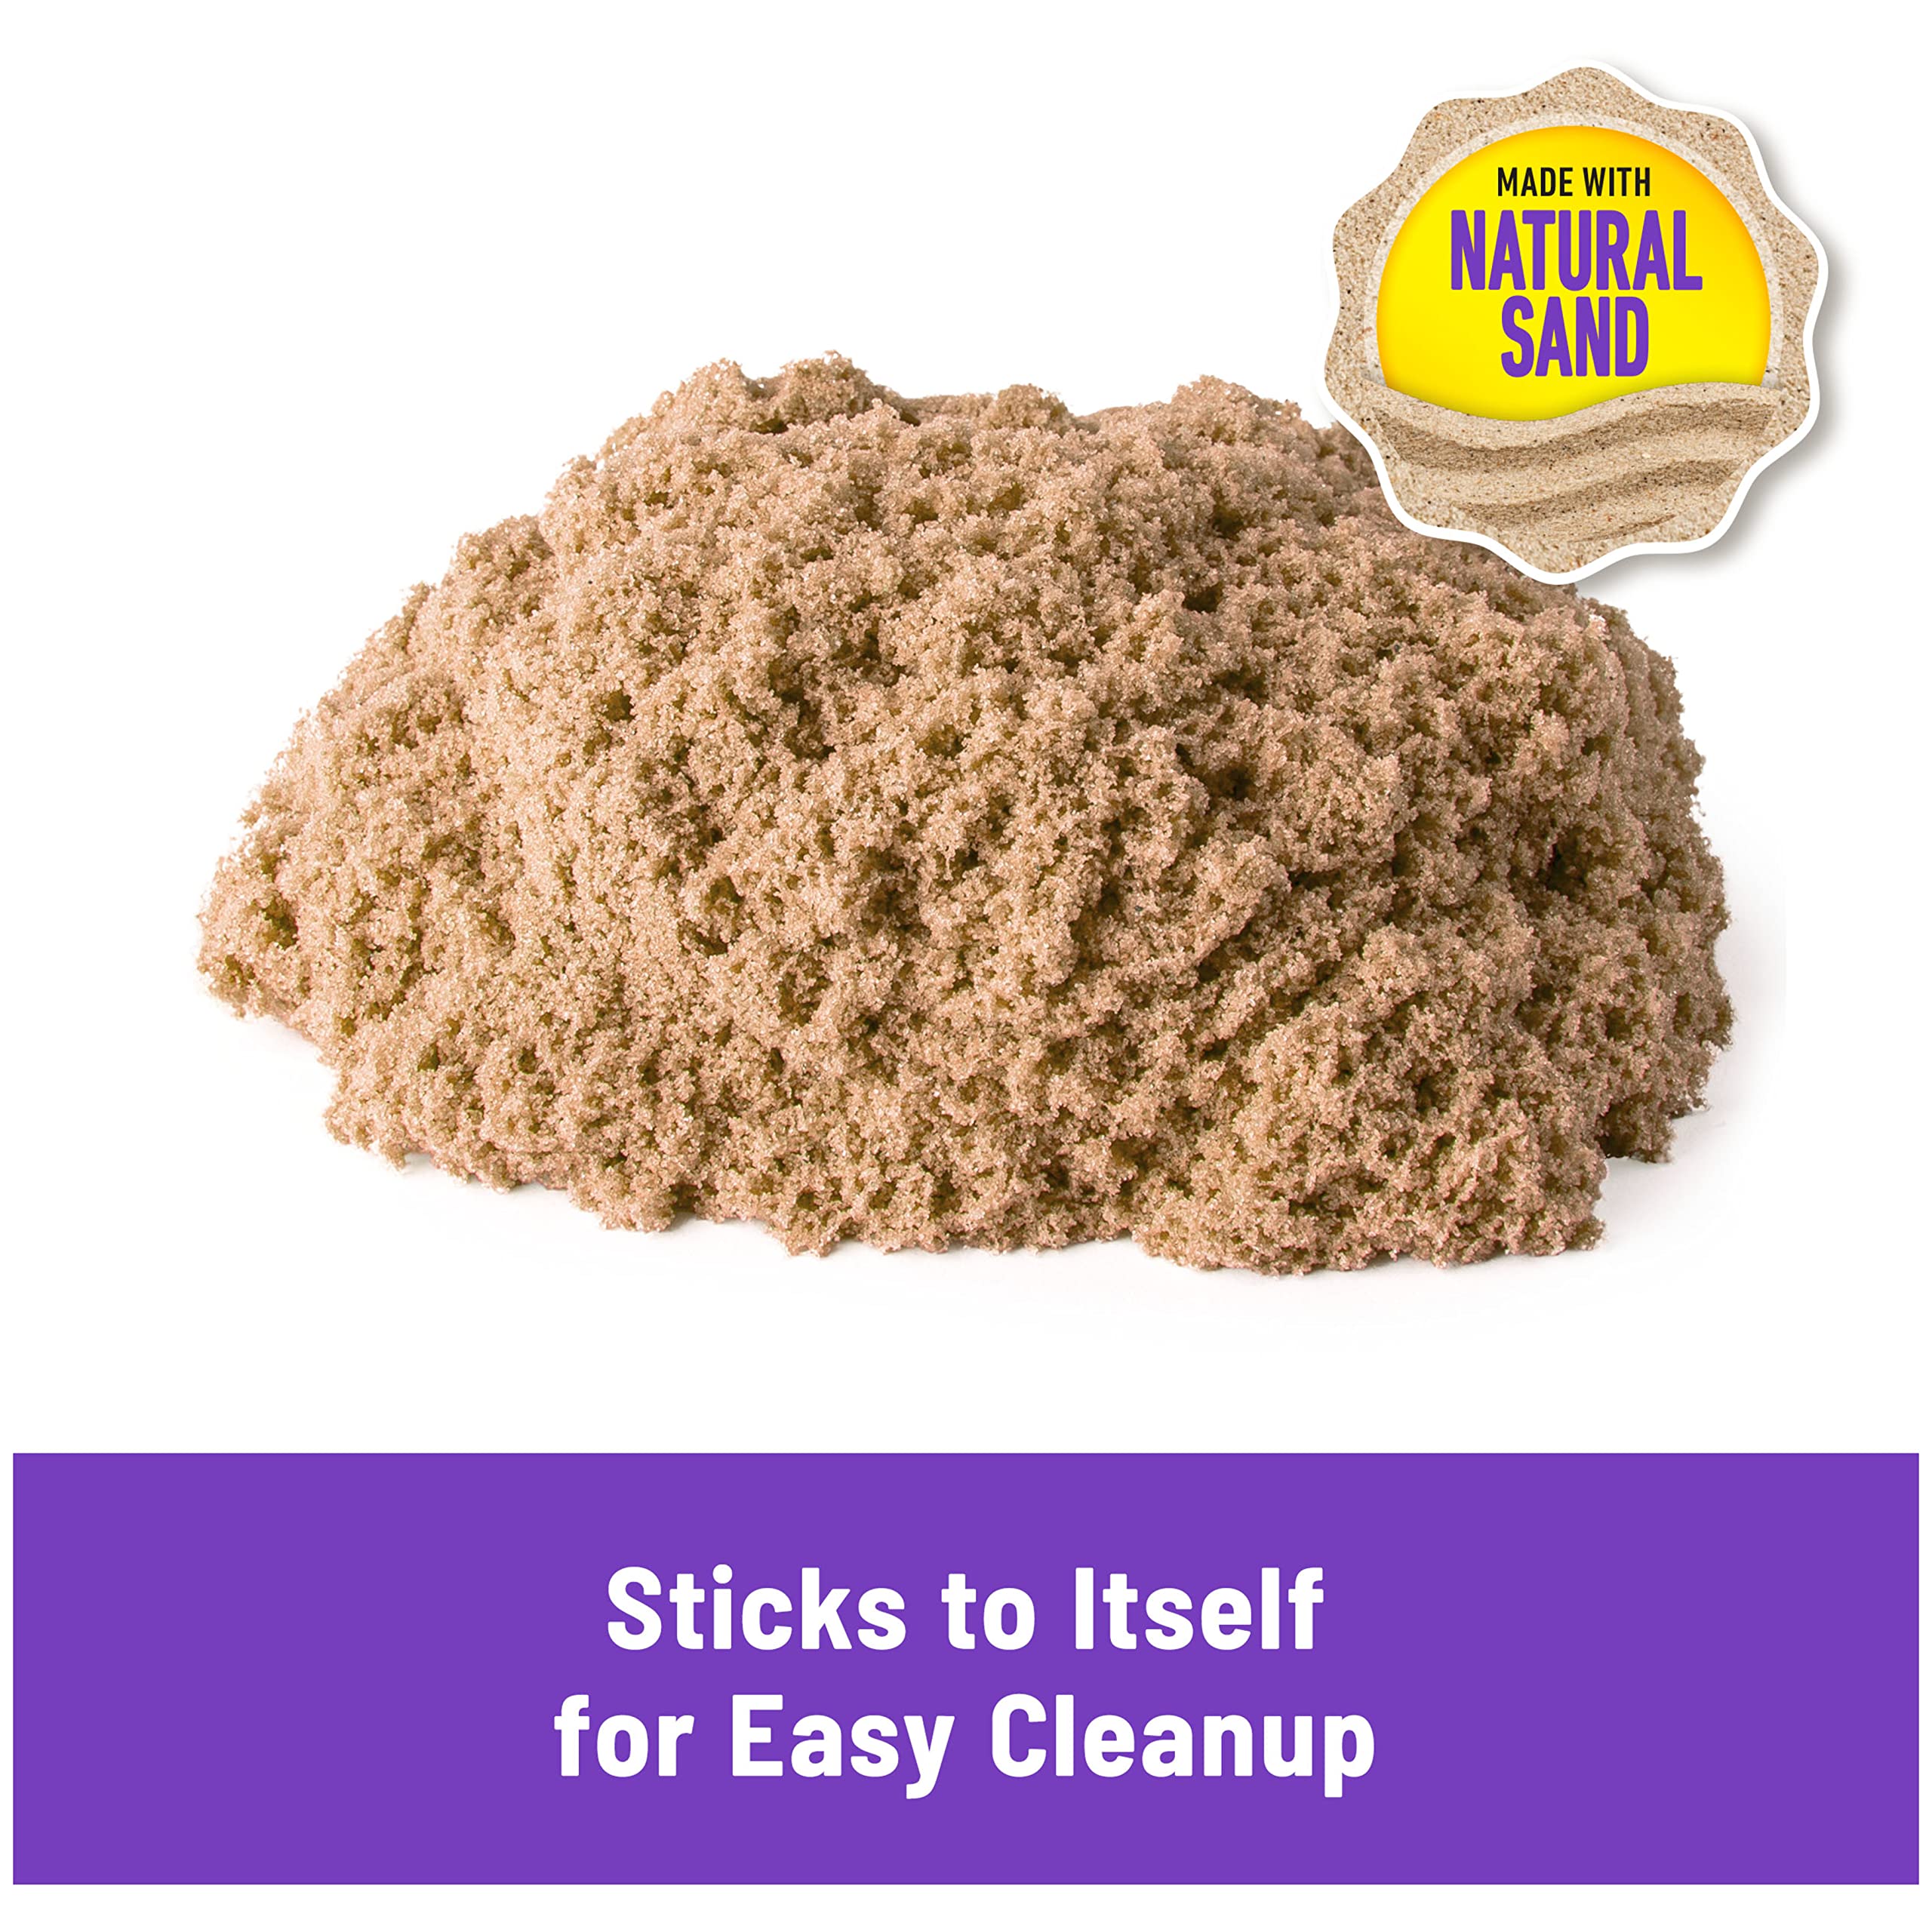 Kinetic Sand, 3lbs Beach Sand for Ages 3 and Up (Packaging My Vary)